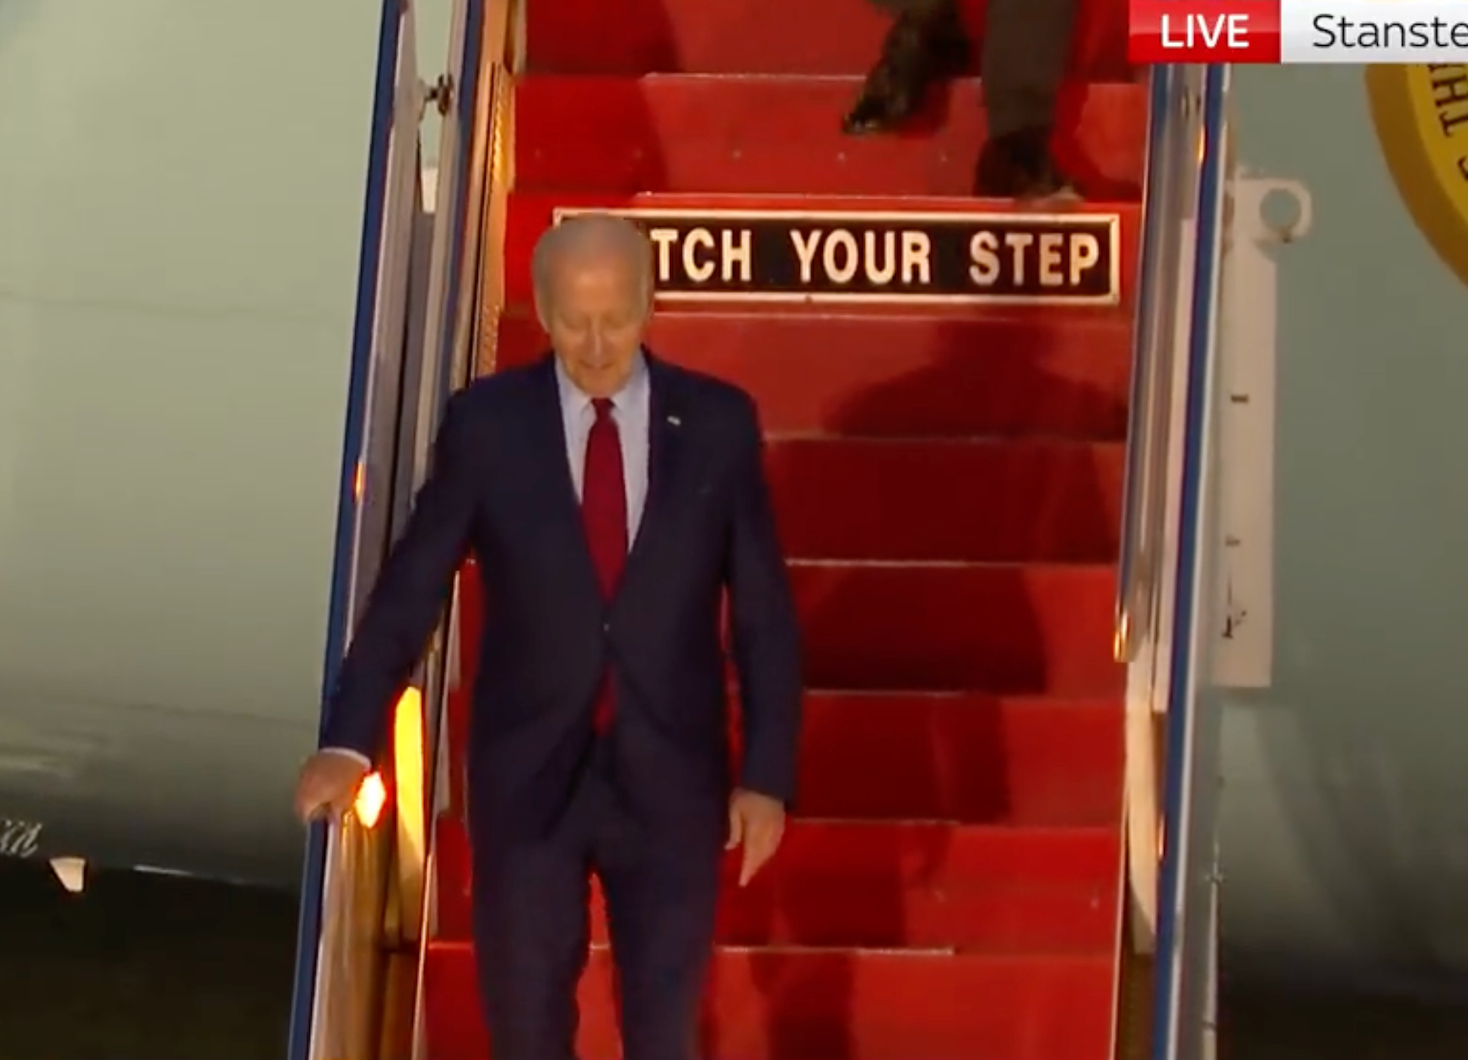 A ‘watch your step’ sign was spotted on Air Force One as Joe Biden arrived in the UK earlier this week.